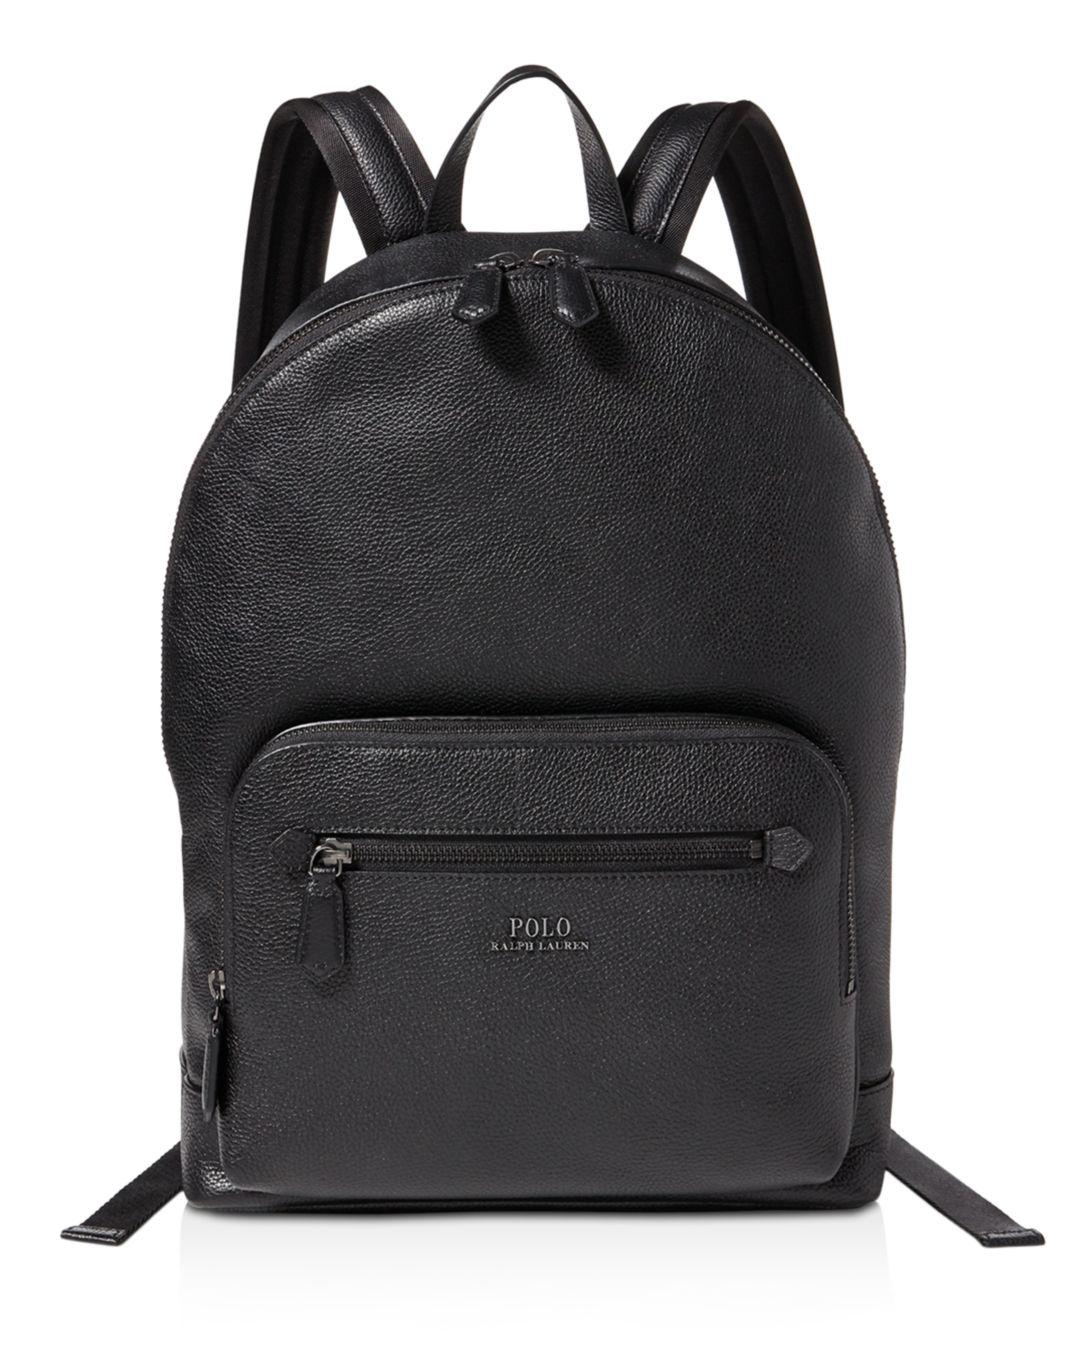 Polo Ralph Lauren Leather Pebbled Jacquard Backpack in Black for Men - Lyst